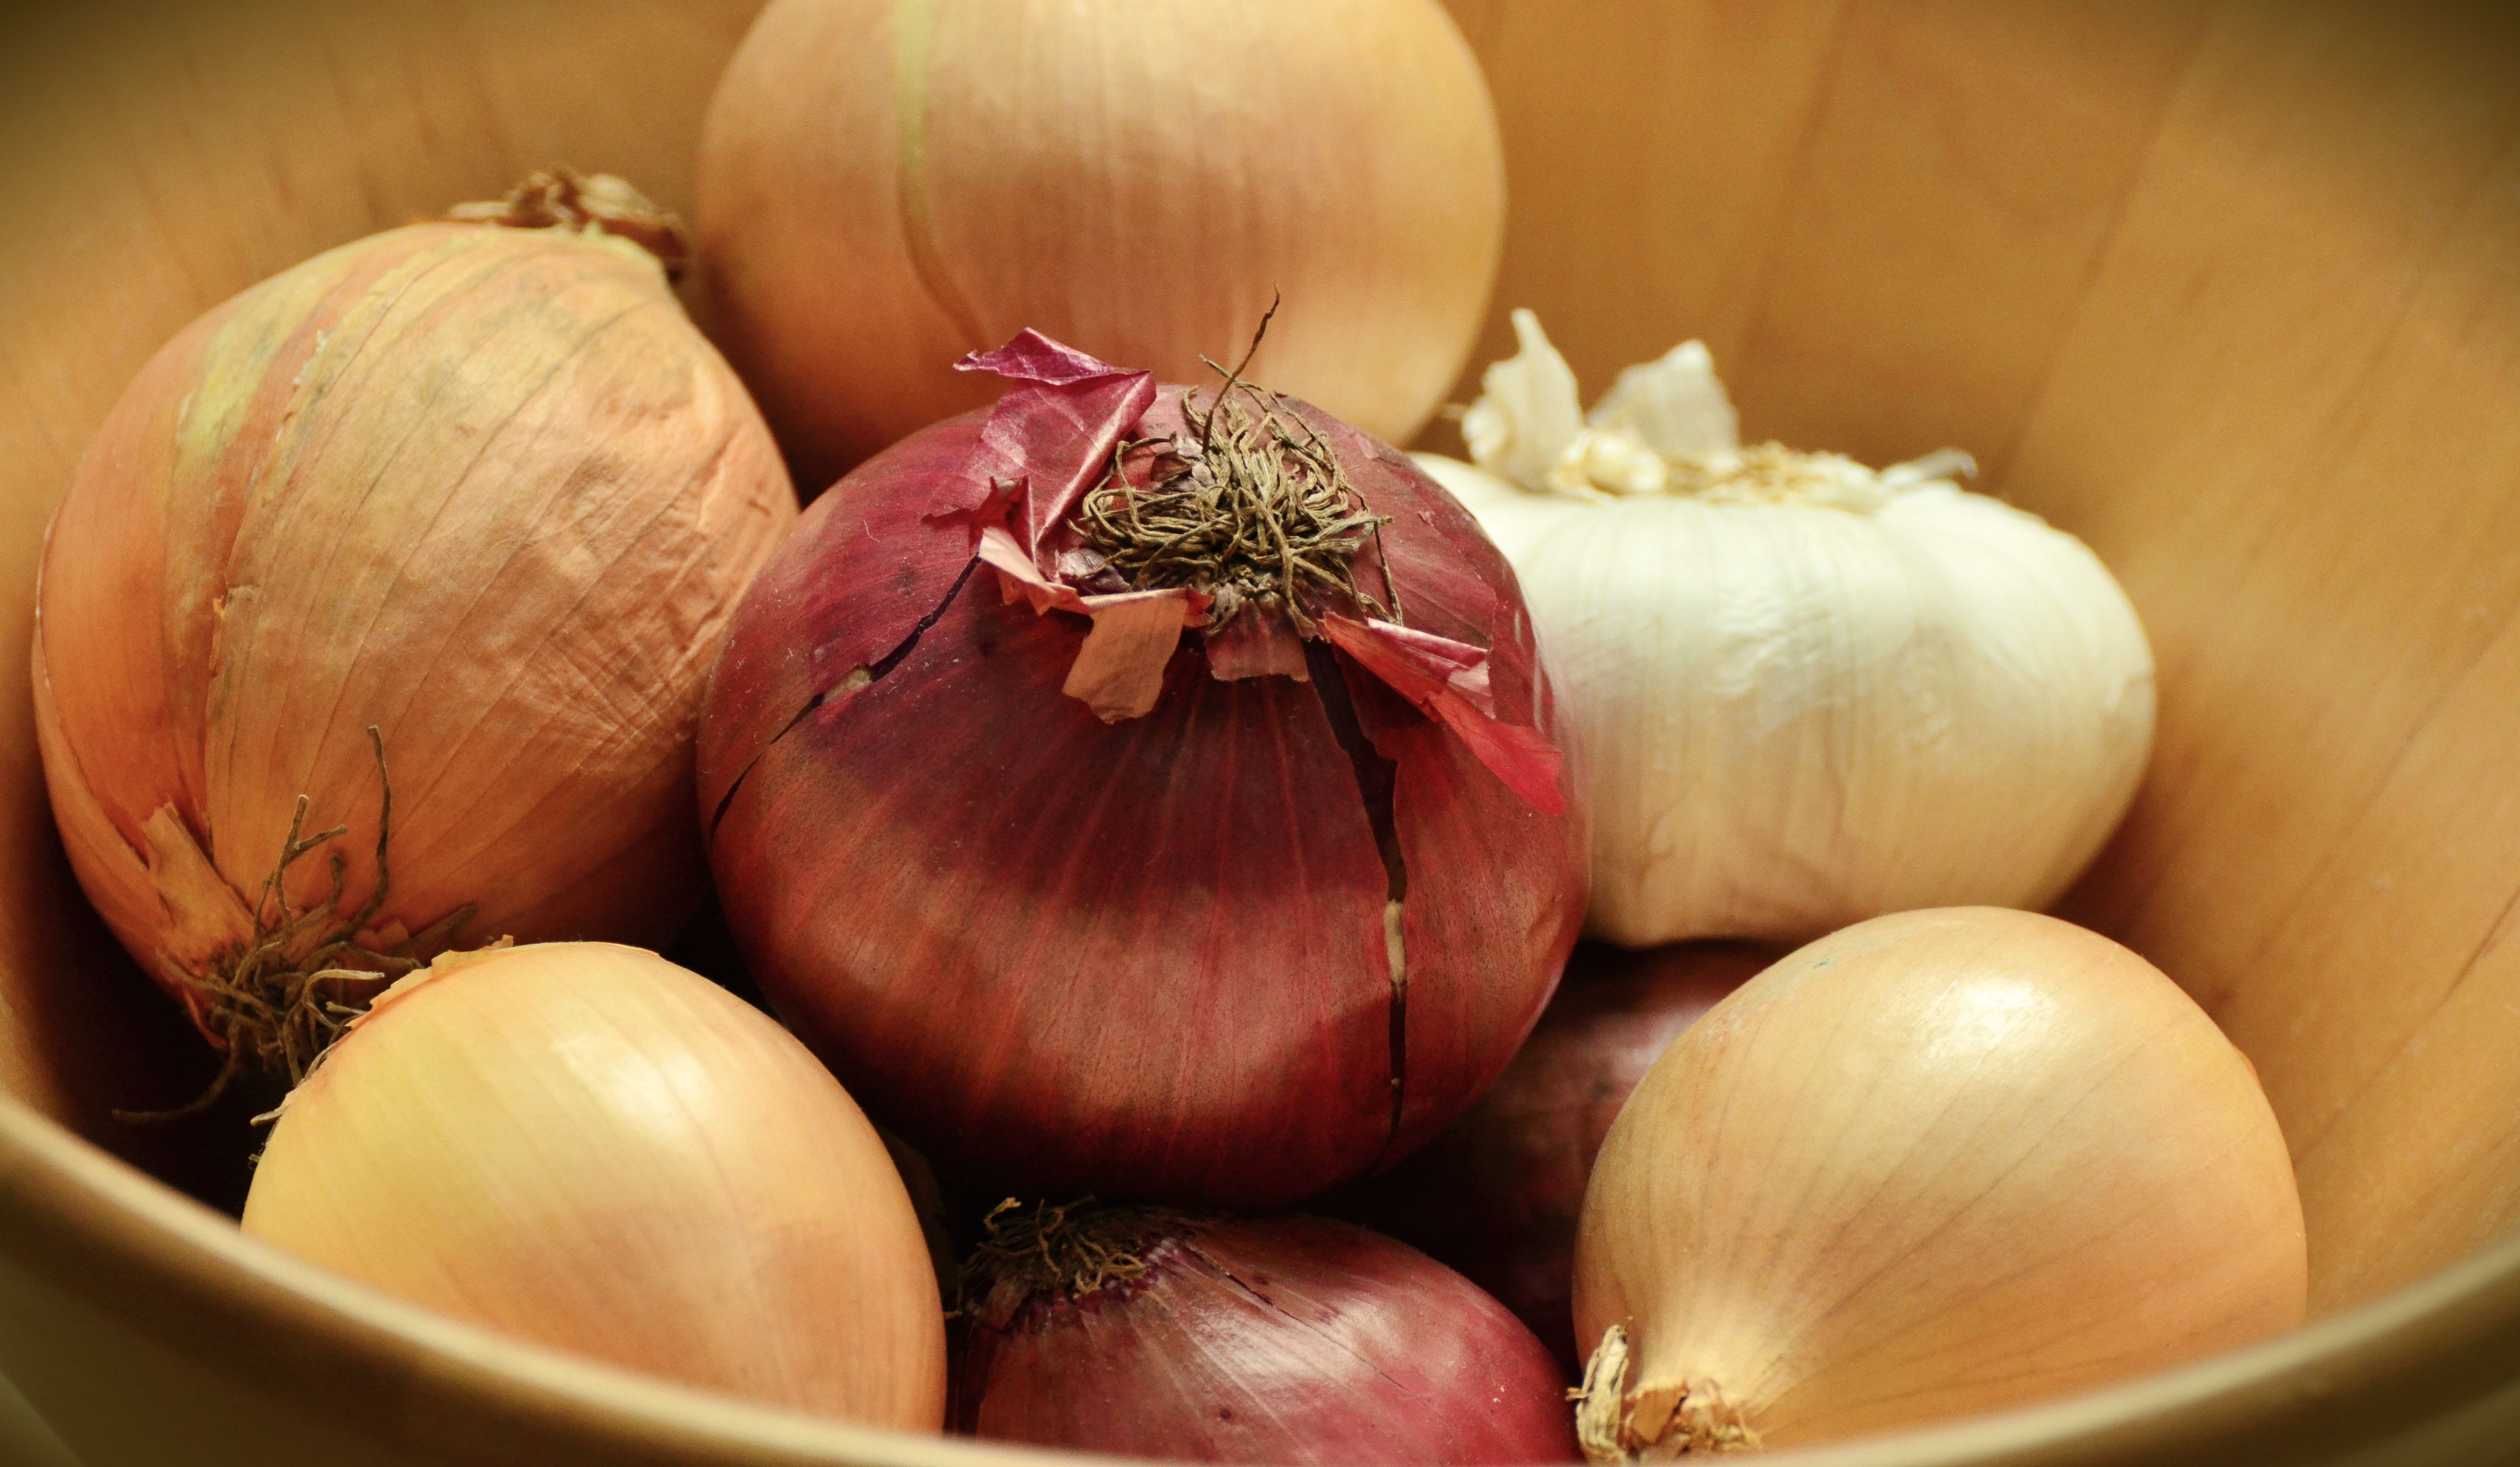 royalty free onions image